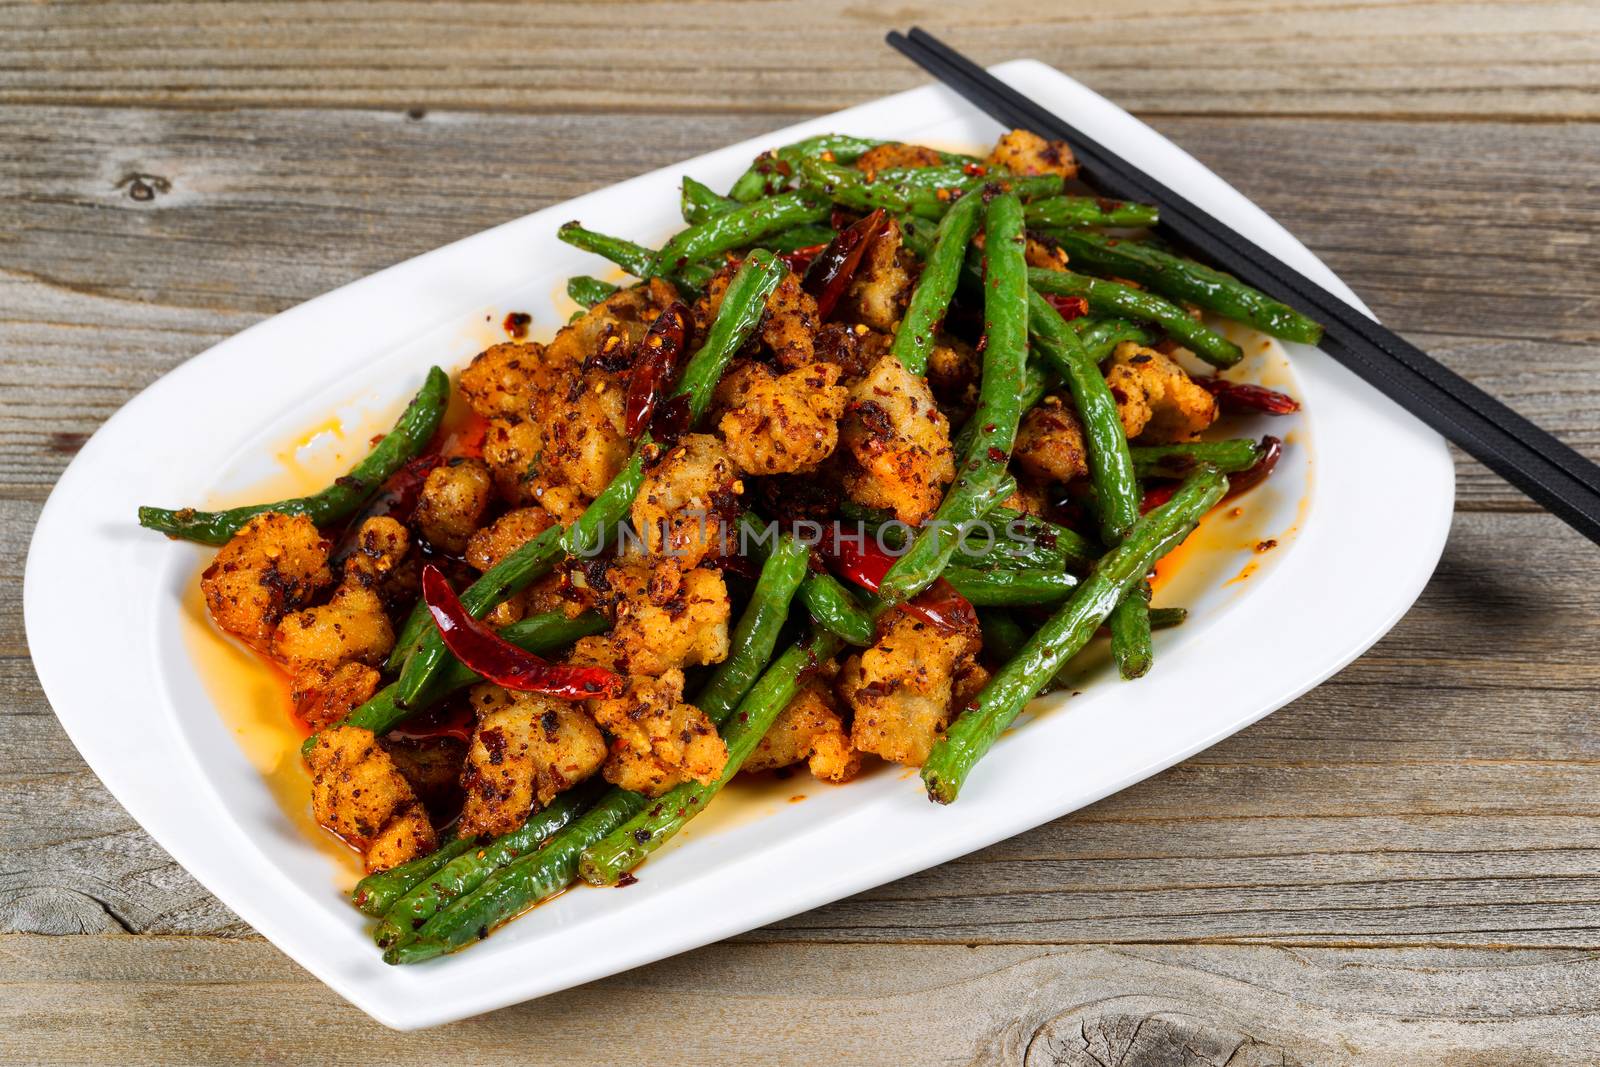 Crispy chicken and green bean dish ready to eat by tab1962